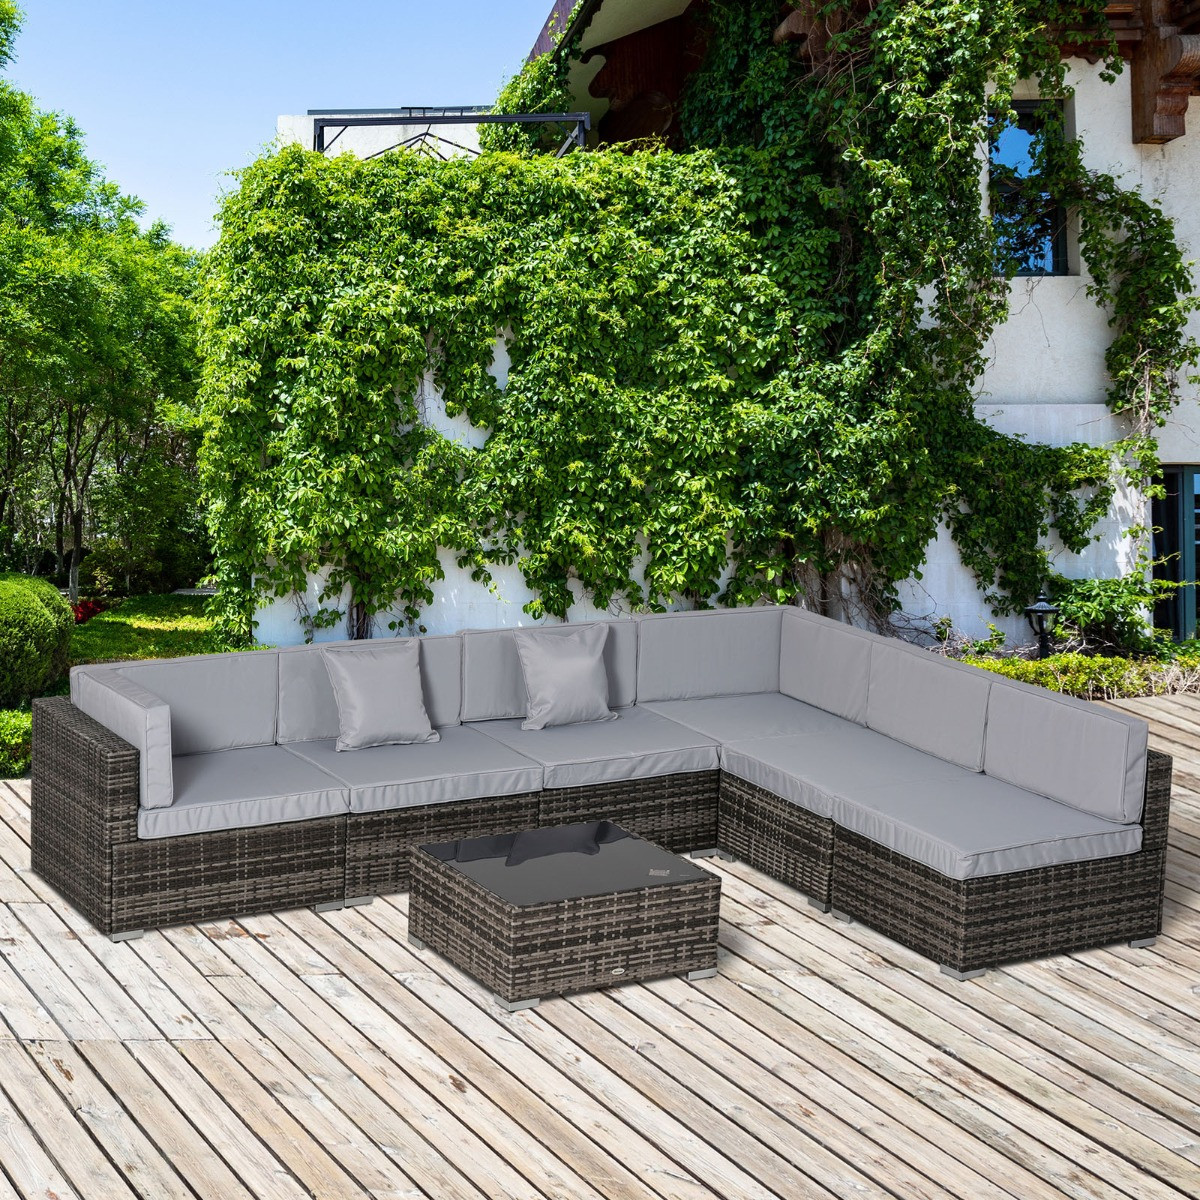 Outsunny Wicker Rattan Sectional Sofa Furniture Set, Grey - 6 Seater>